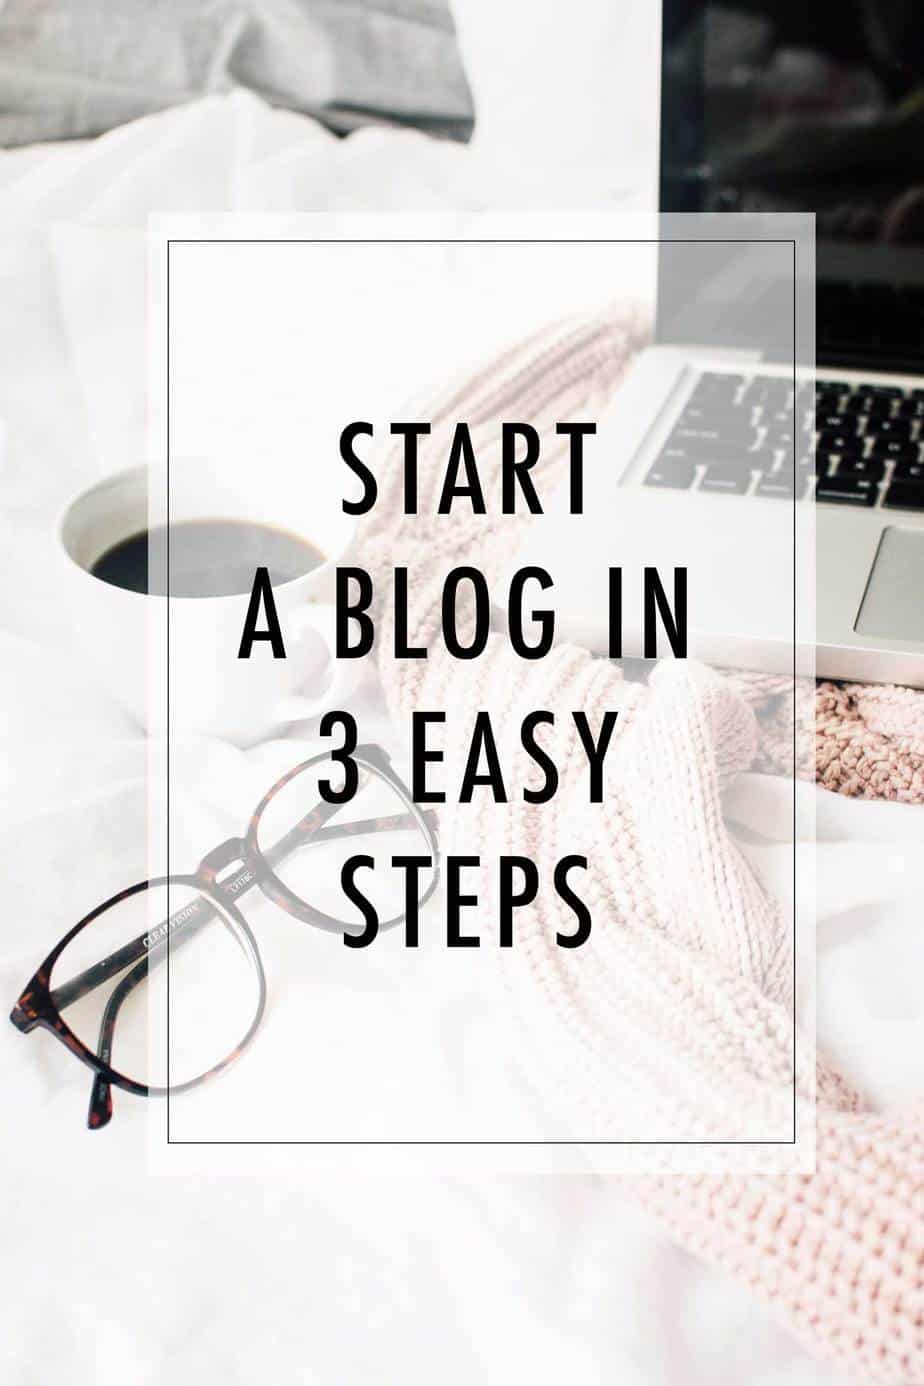 Start a blog in 3 easy steps and learn how to make money from blogging